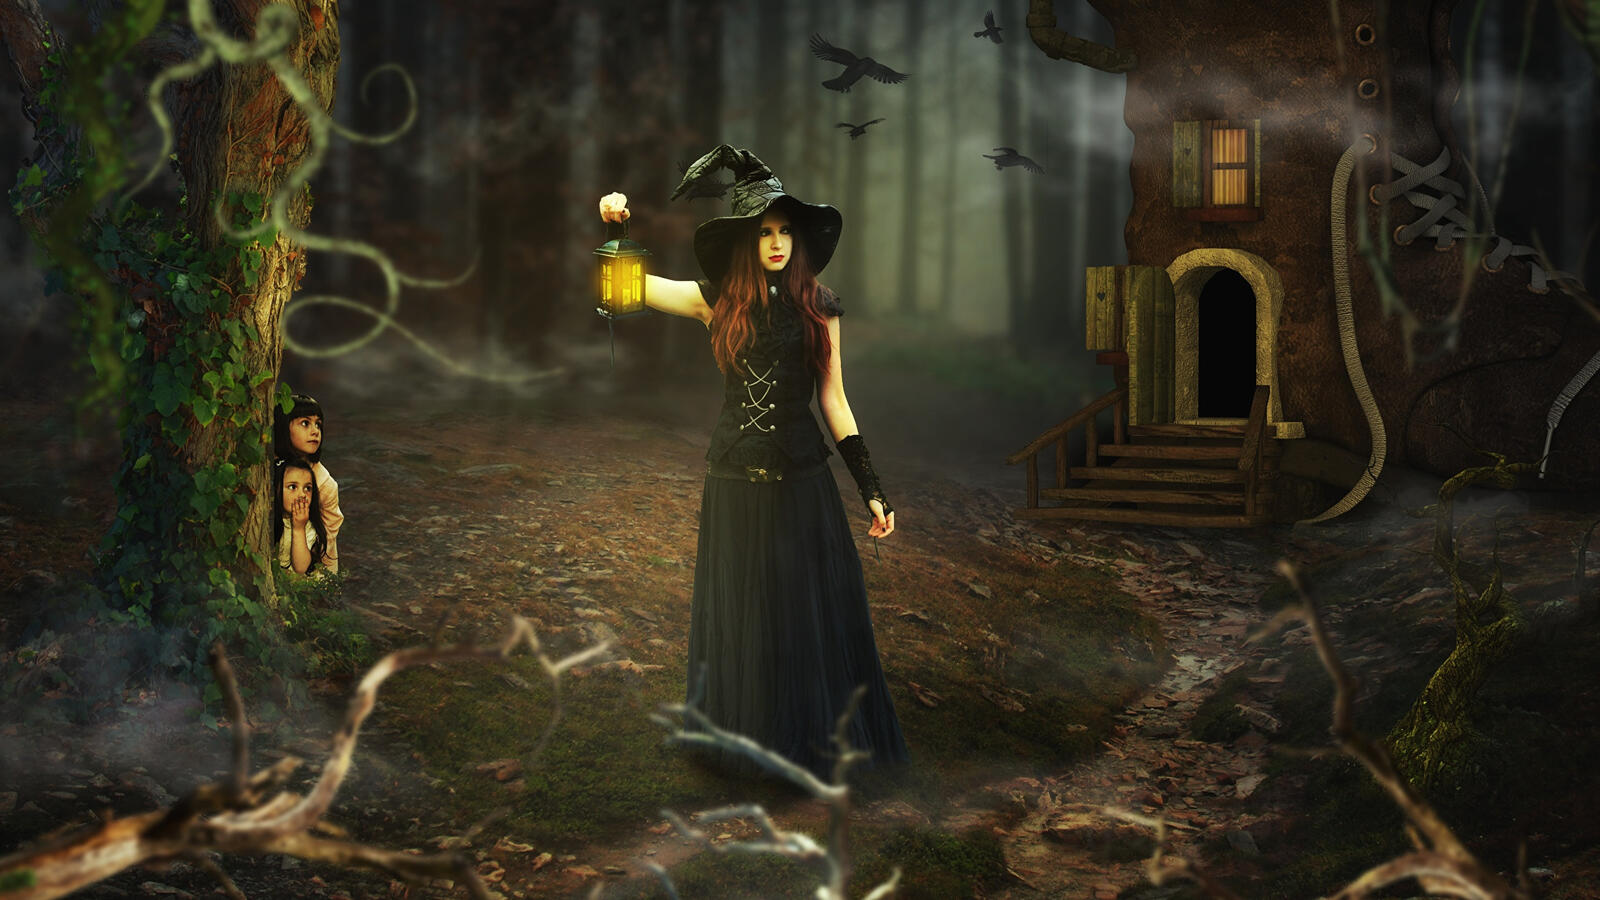 Free photo A witch on Halloween in a fantastically gloomy forest